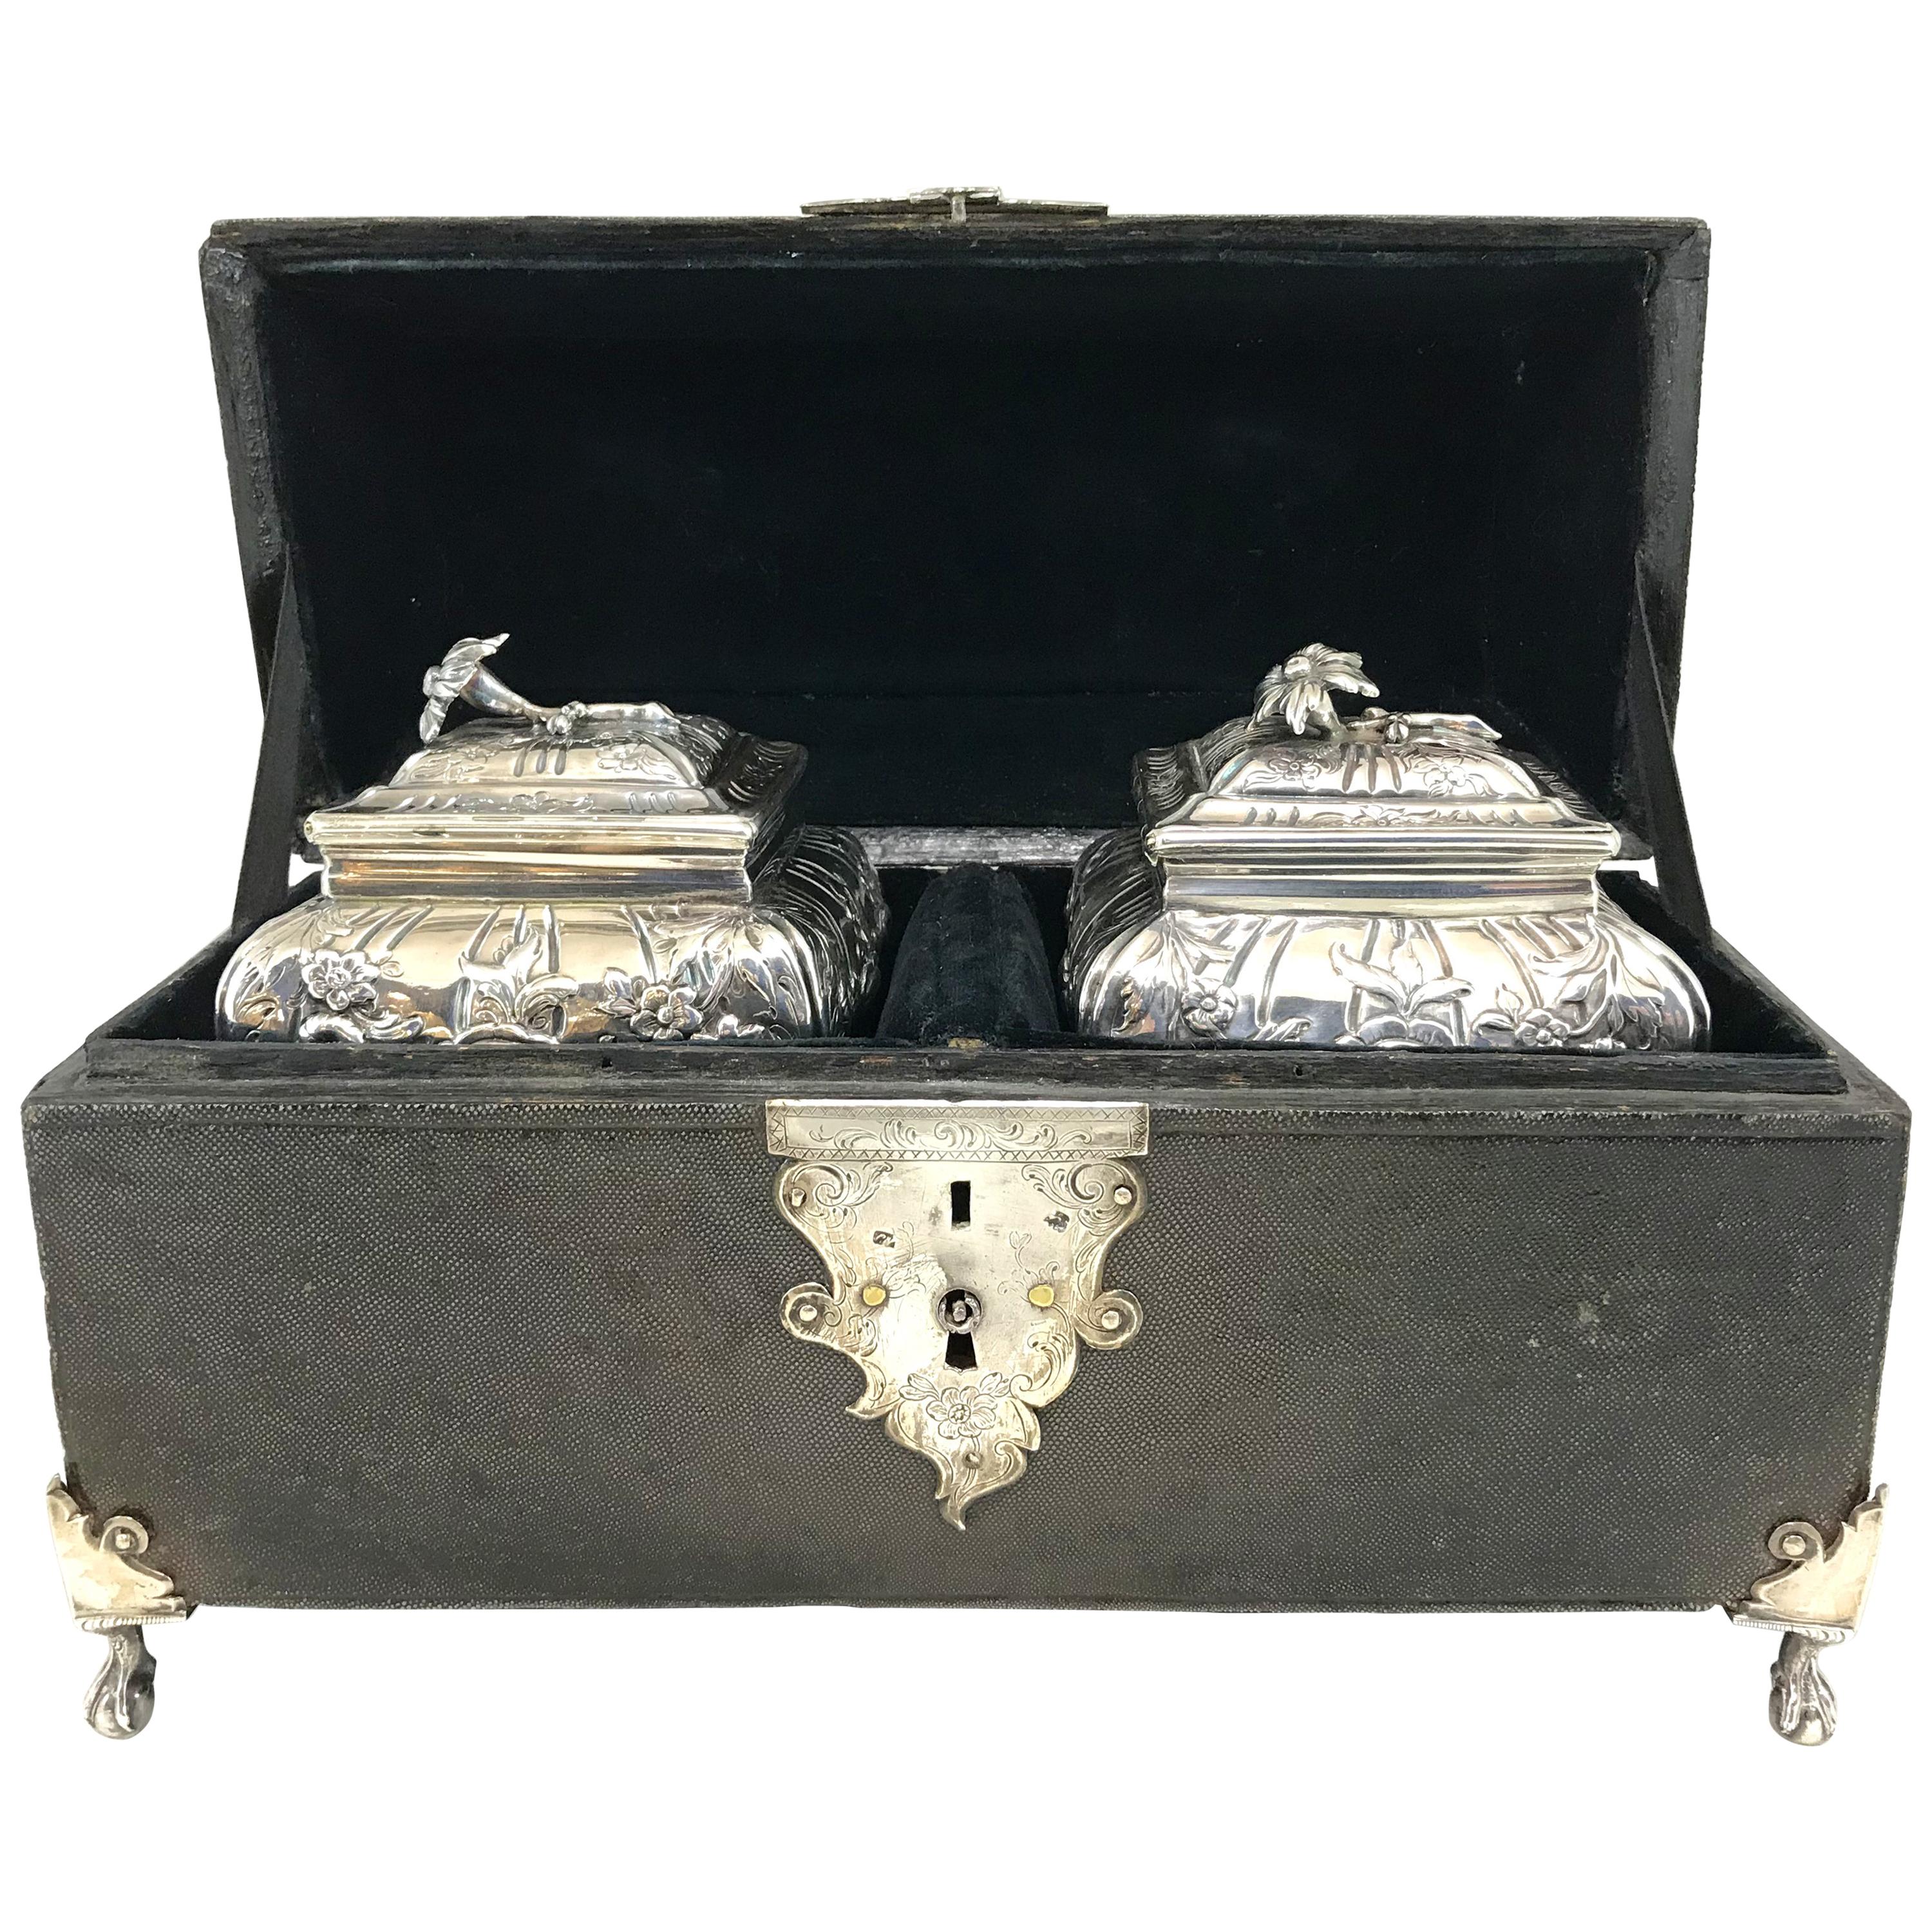 An exceptional George III shagreen cased tea caddy box with silver ball and claw feet, foliate chased silver key hole escutcheon plate, decorative scroll form handleplate and handle with monogrammed cartouche, and a velvet lined fitted interior